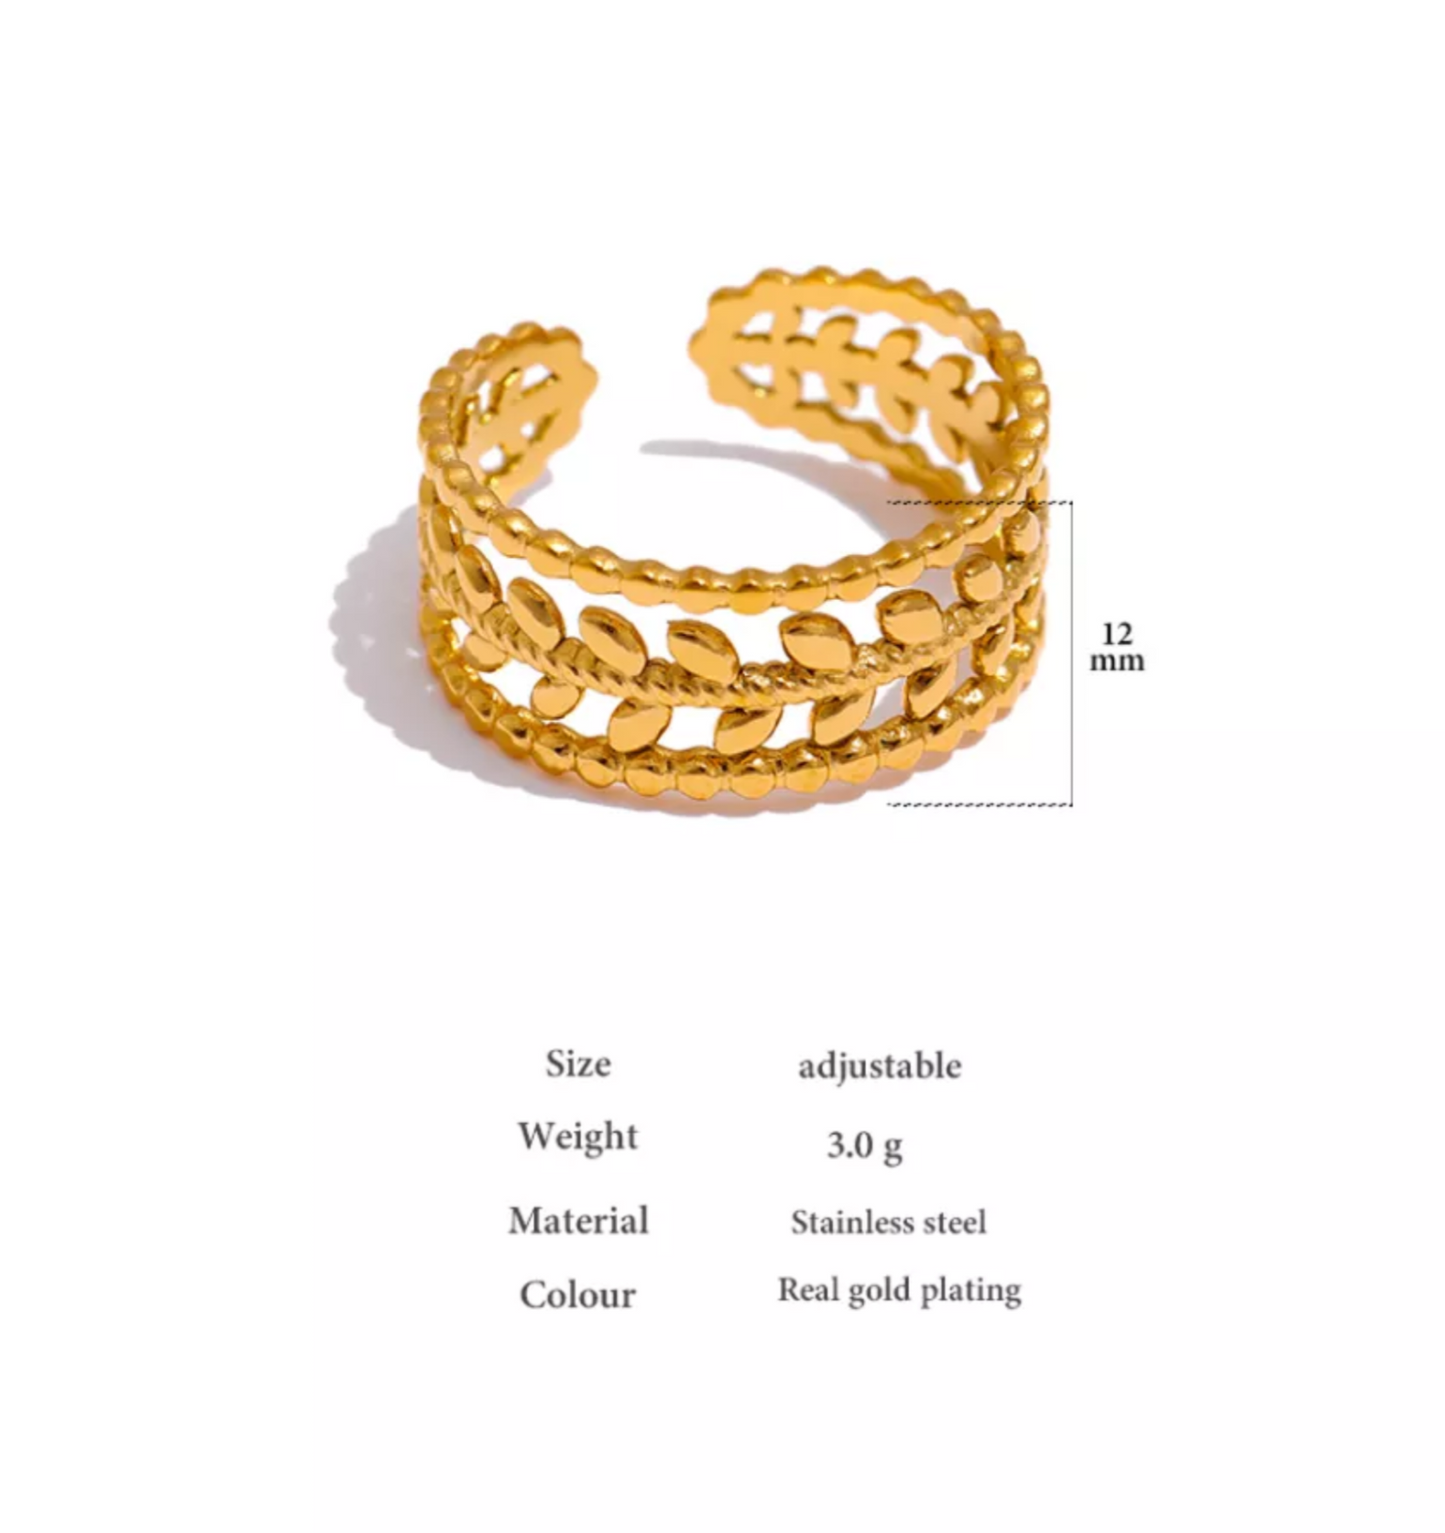 MIMI - Adjustable Autumn Leaves Ring - Golden Collection